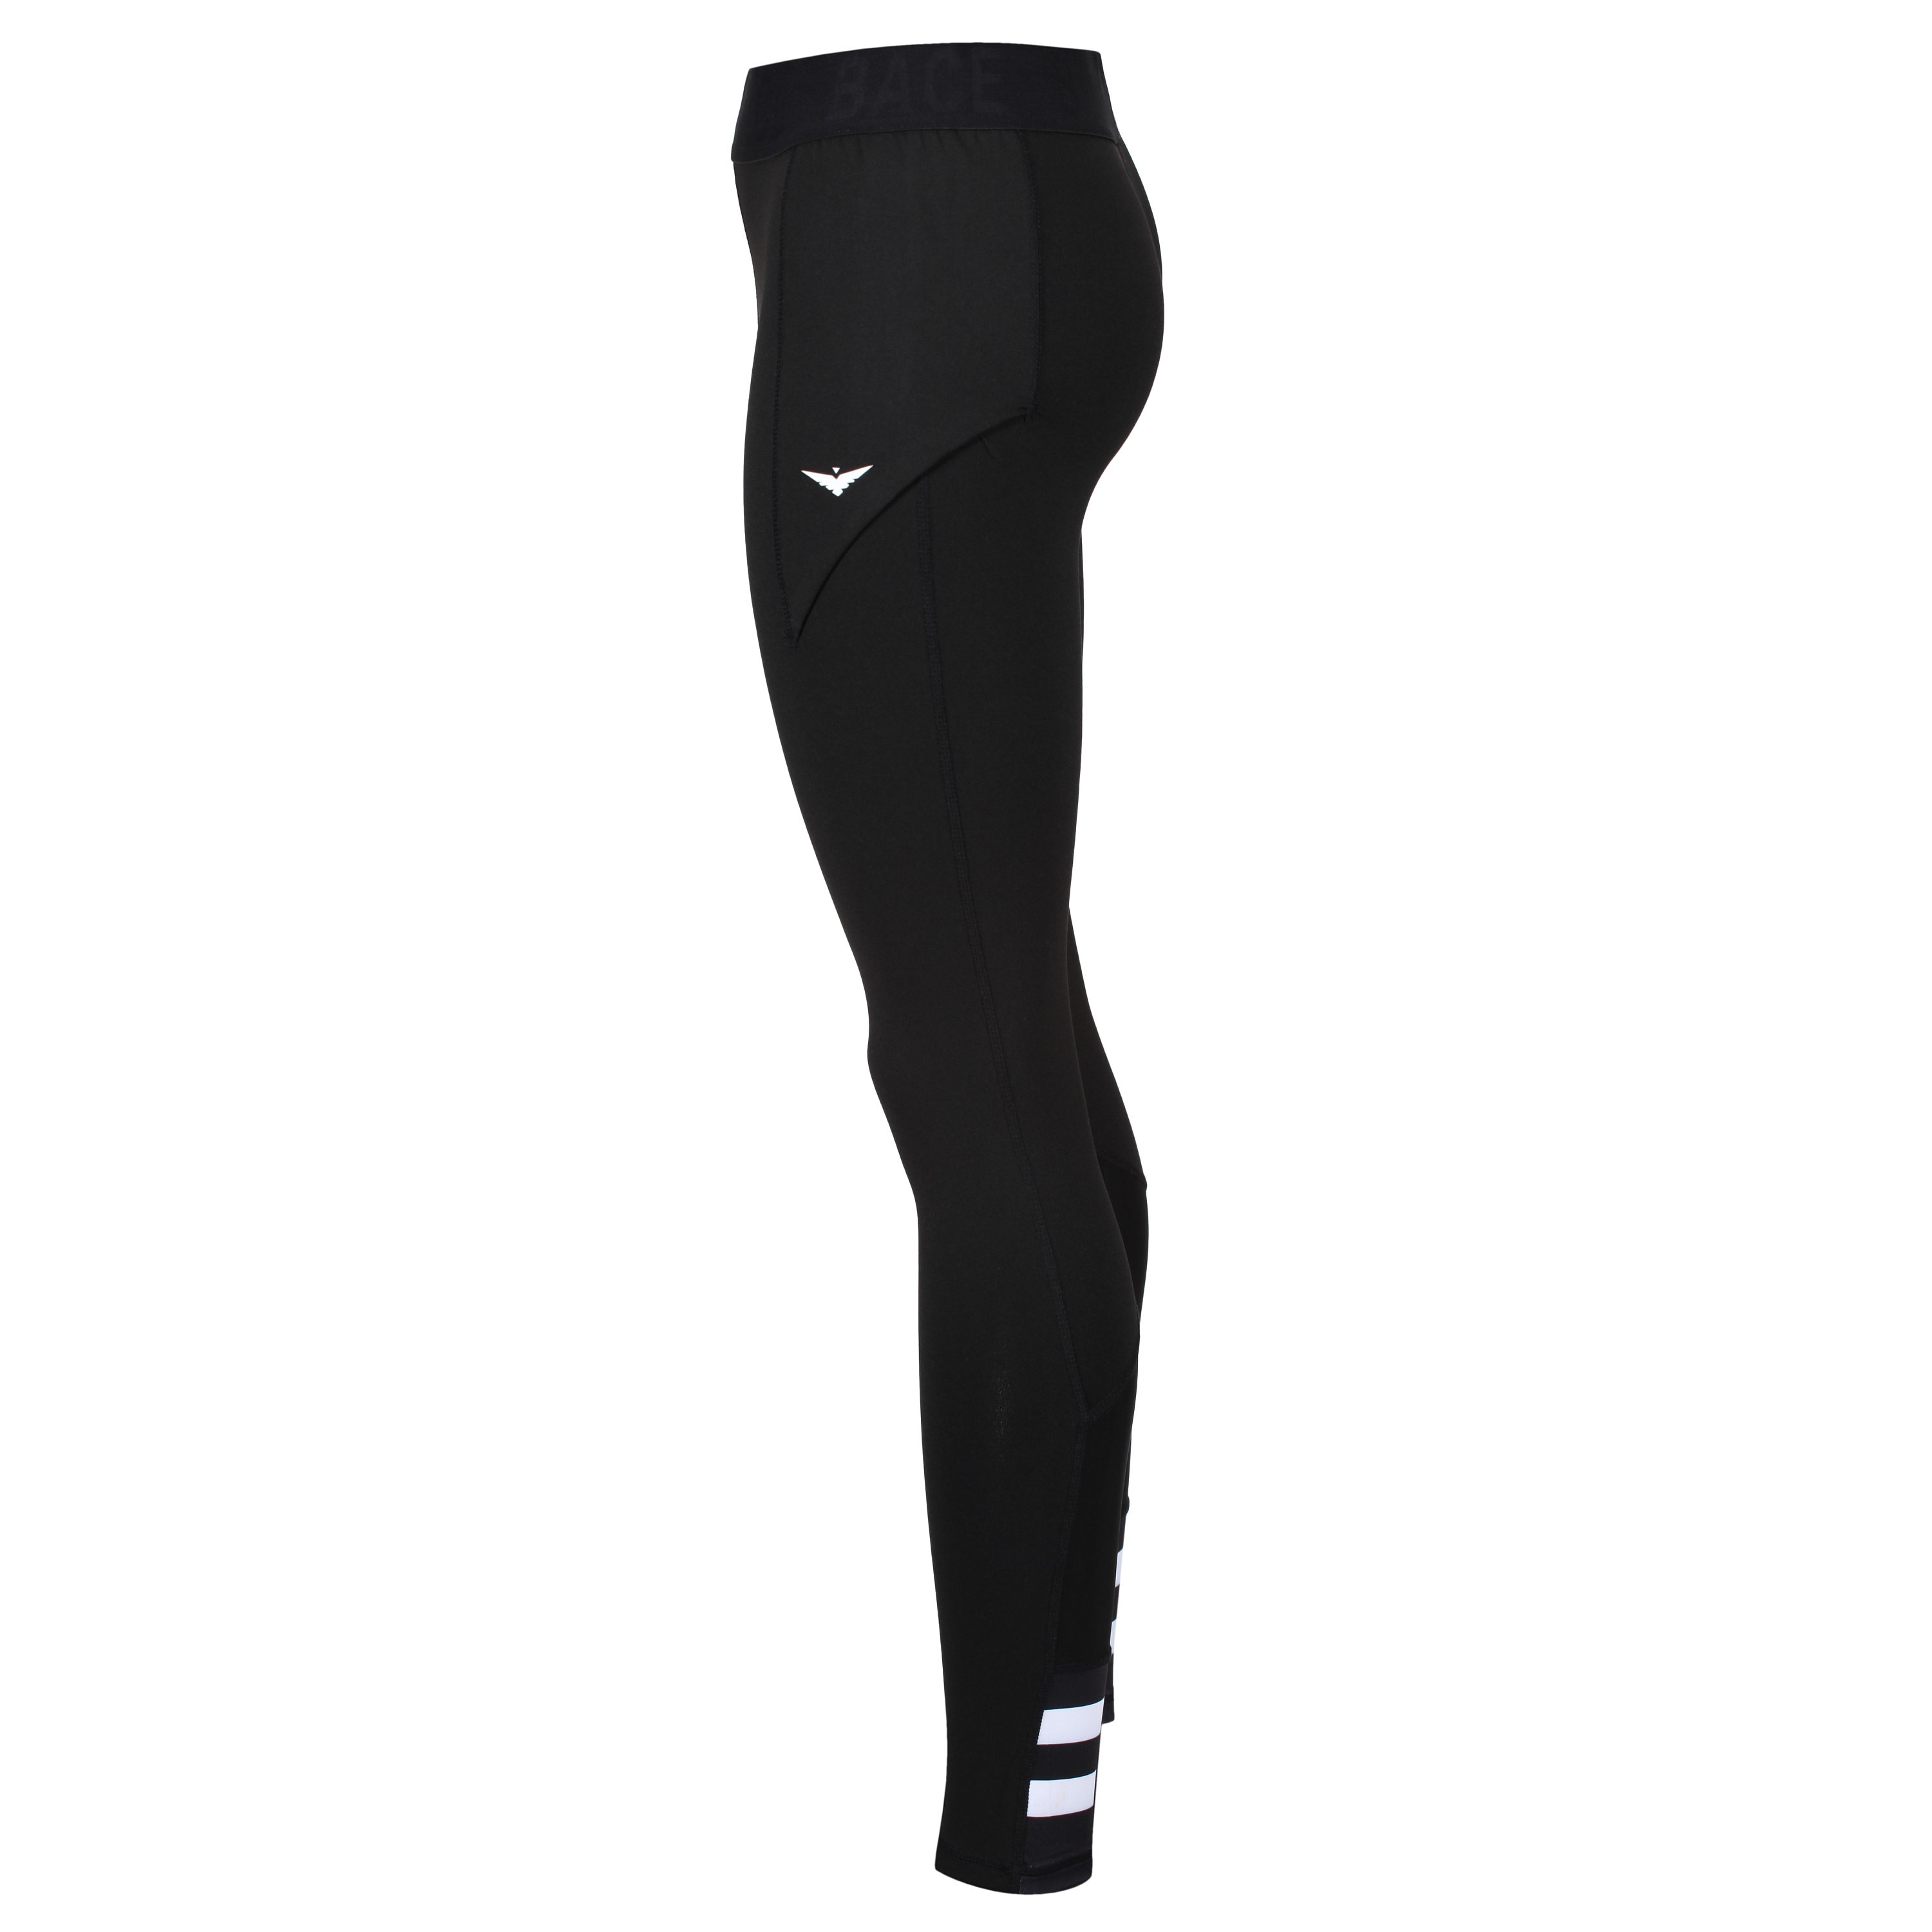 Buy Girls Tennis Leggings With Ball Pockets, Black Leggings With Pockets,  Black Fitness Tights, Girls Tights, Running Tights, Online in India 